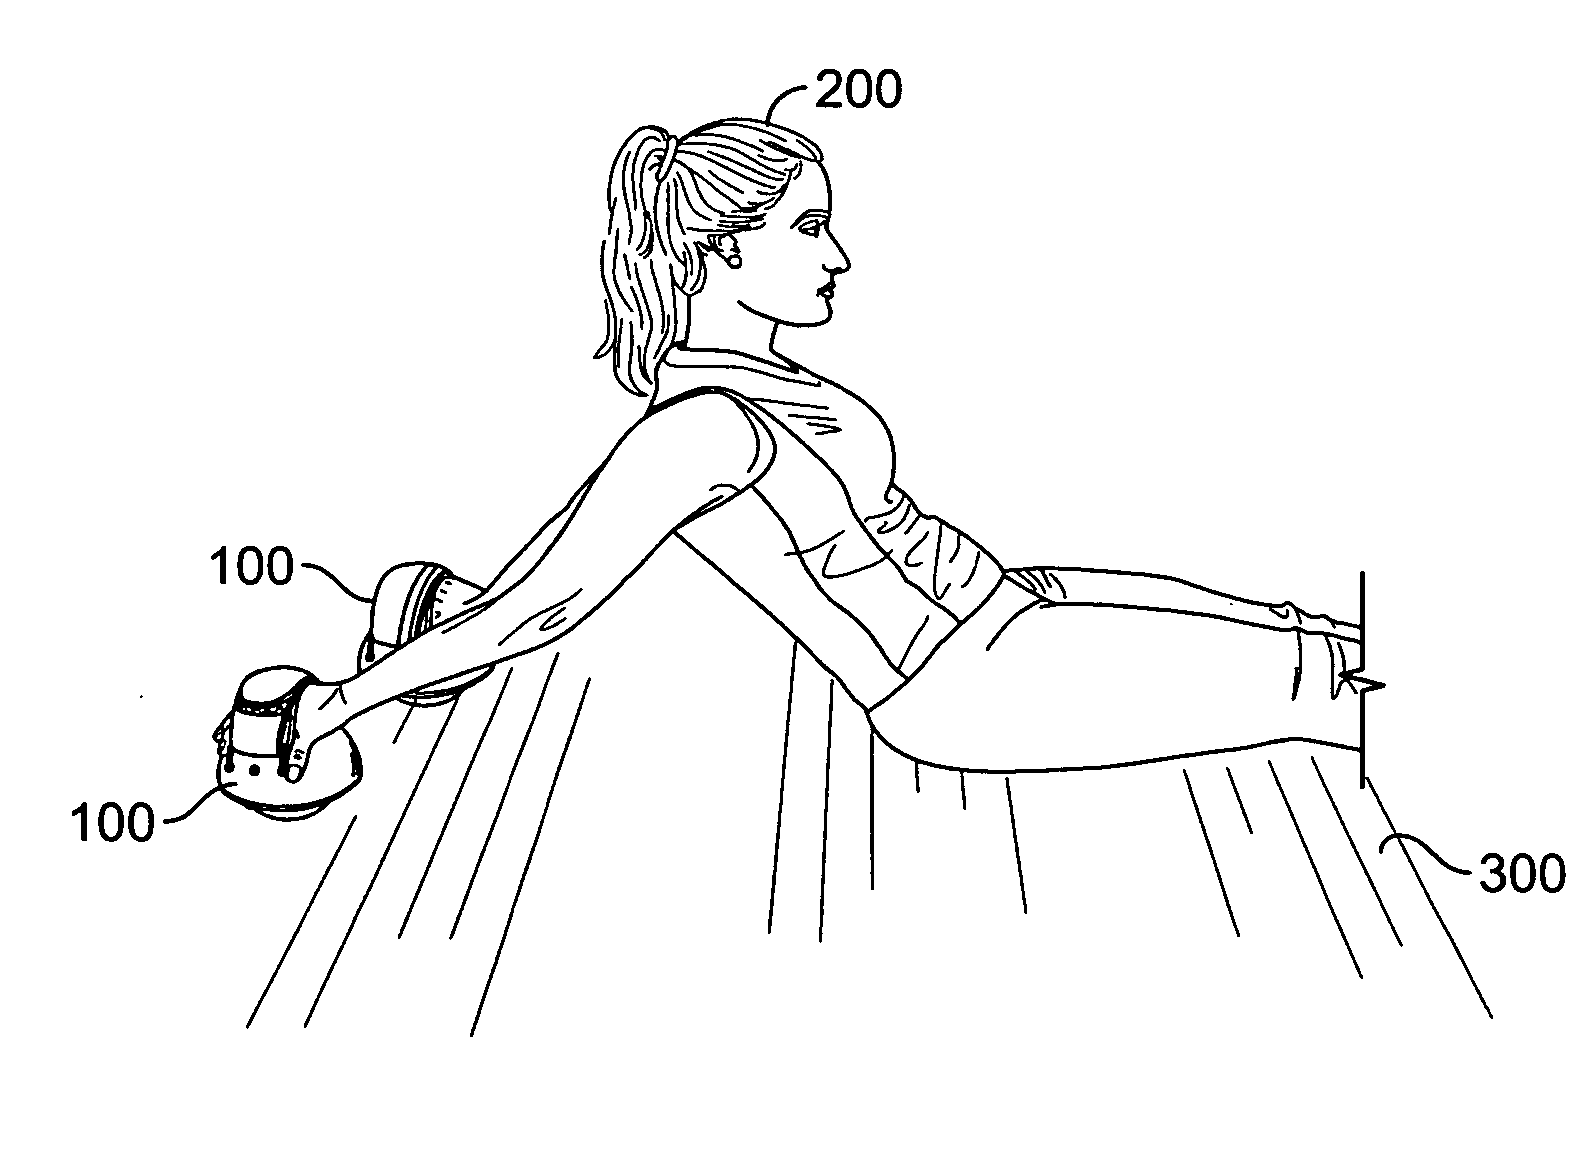 Apparatus and method for exercise using an omnidirectional roller